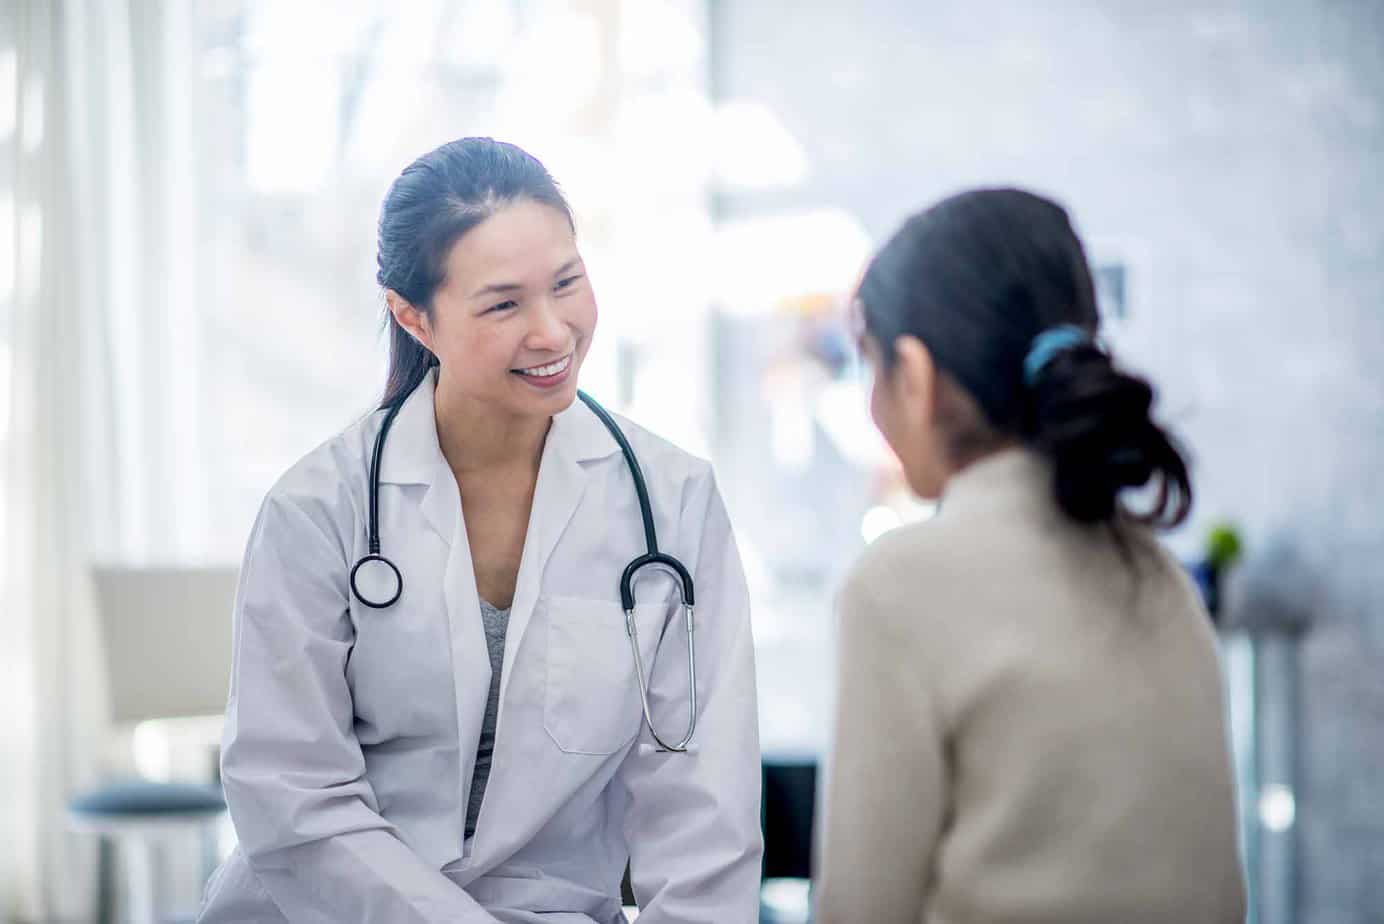 smiling female doctor with stethoscope talking and listening to female patient